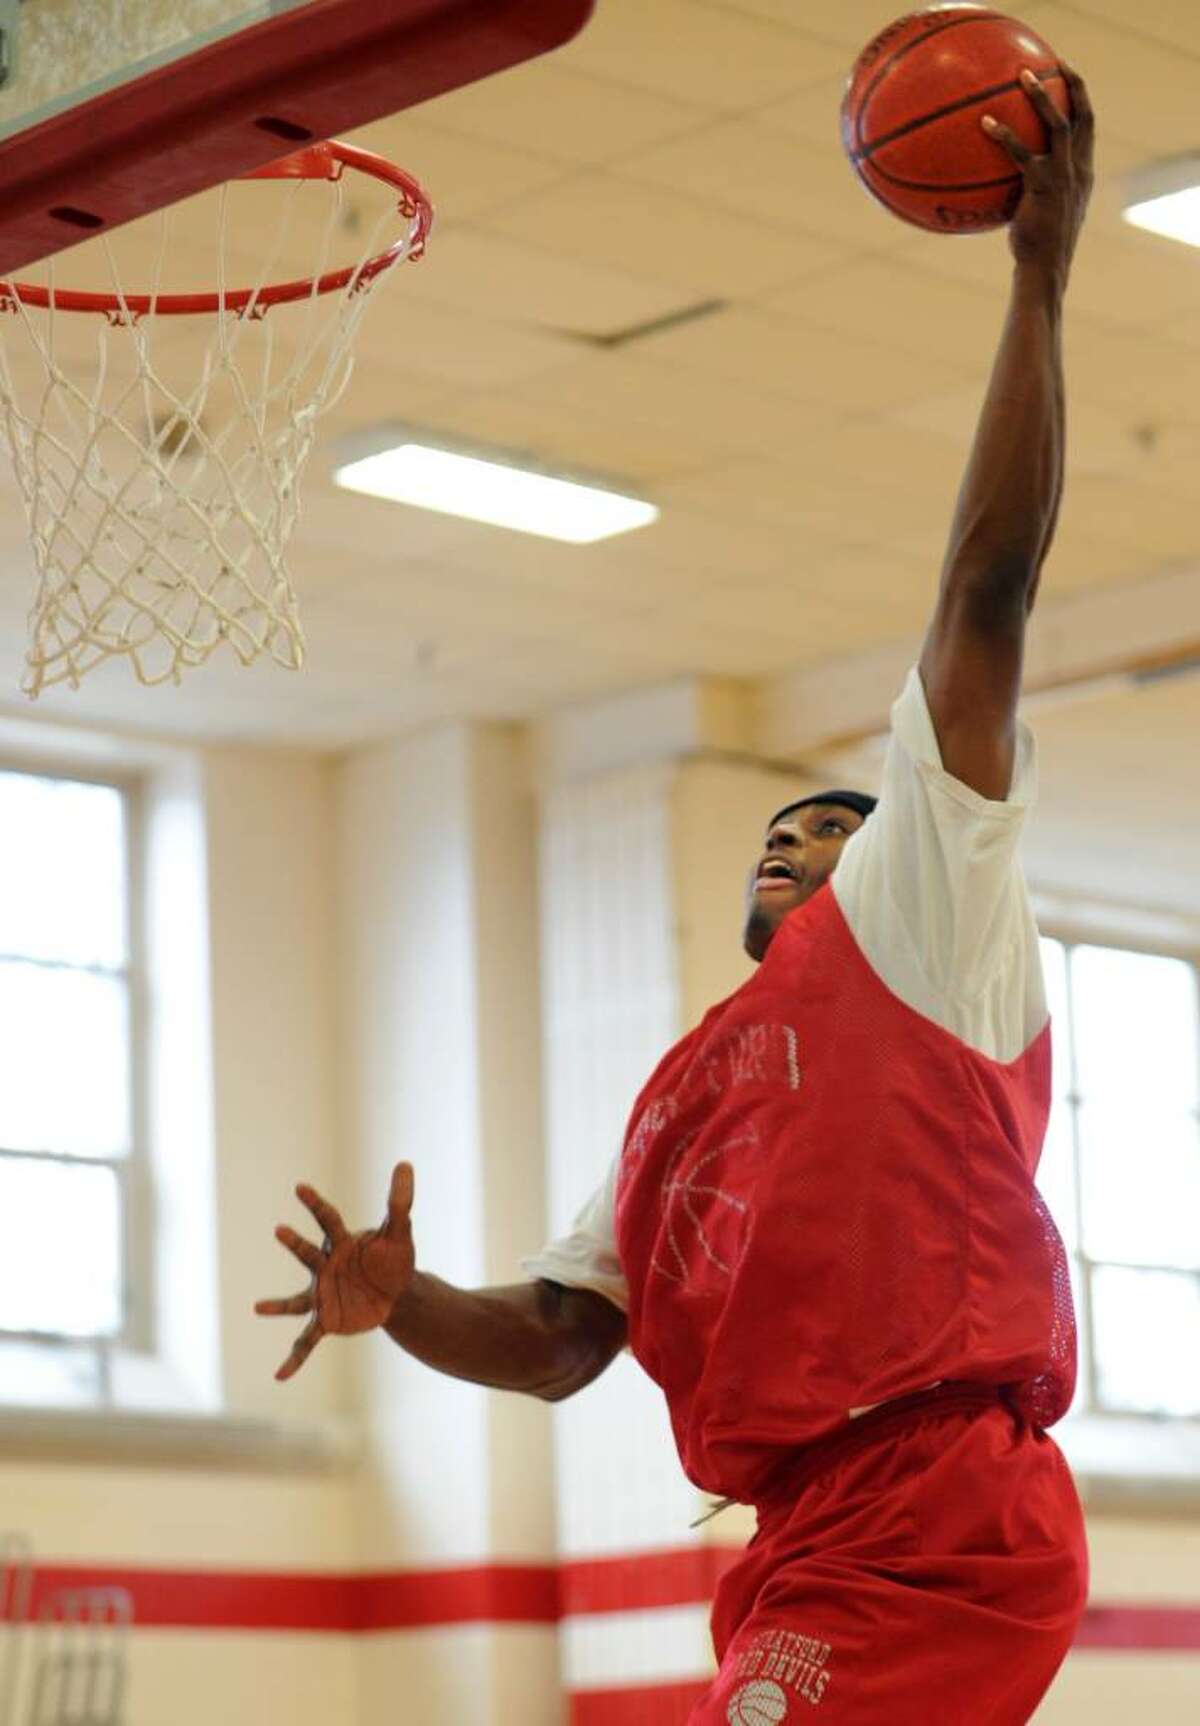 Stratford's Brandon Sherrod soars to the net for a dunk Wednesday Jan. 27, 2010 during practice at Stratford High.